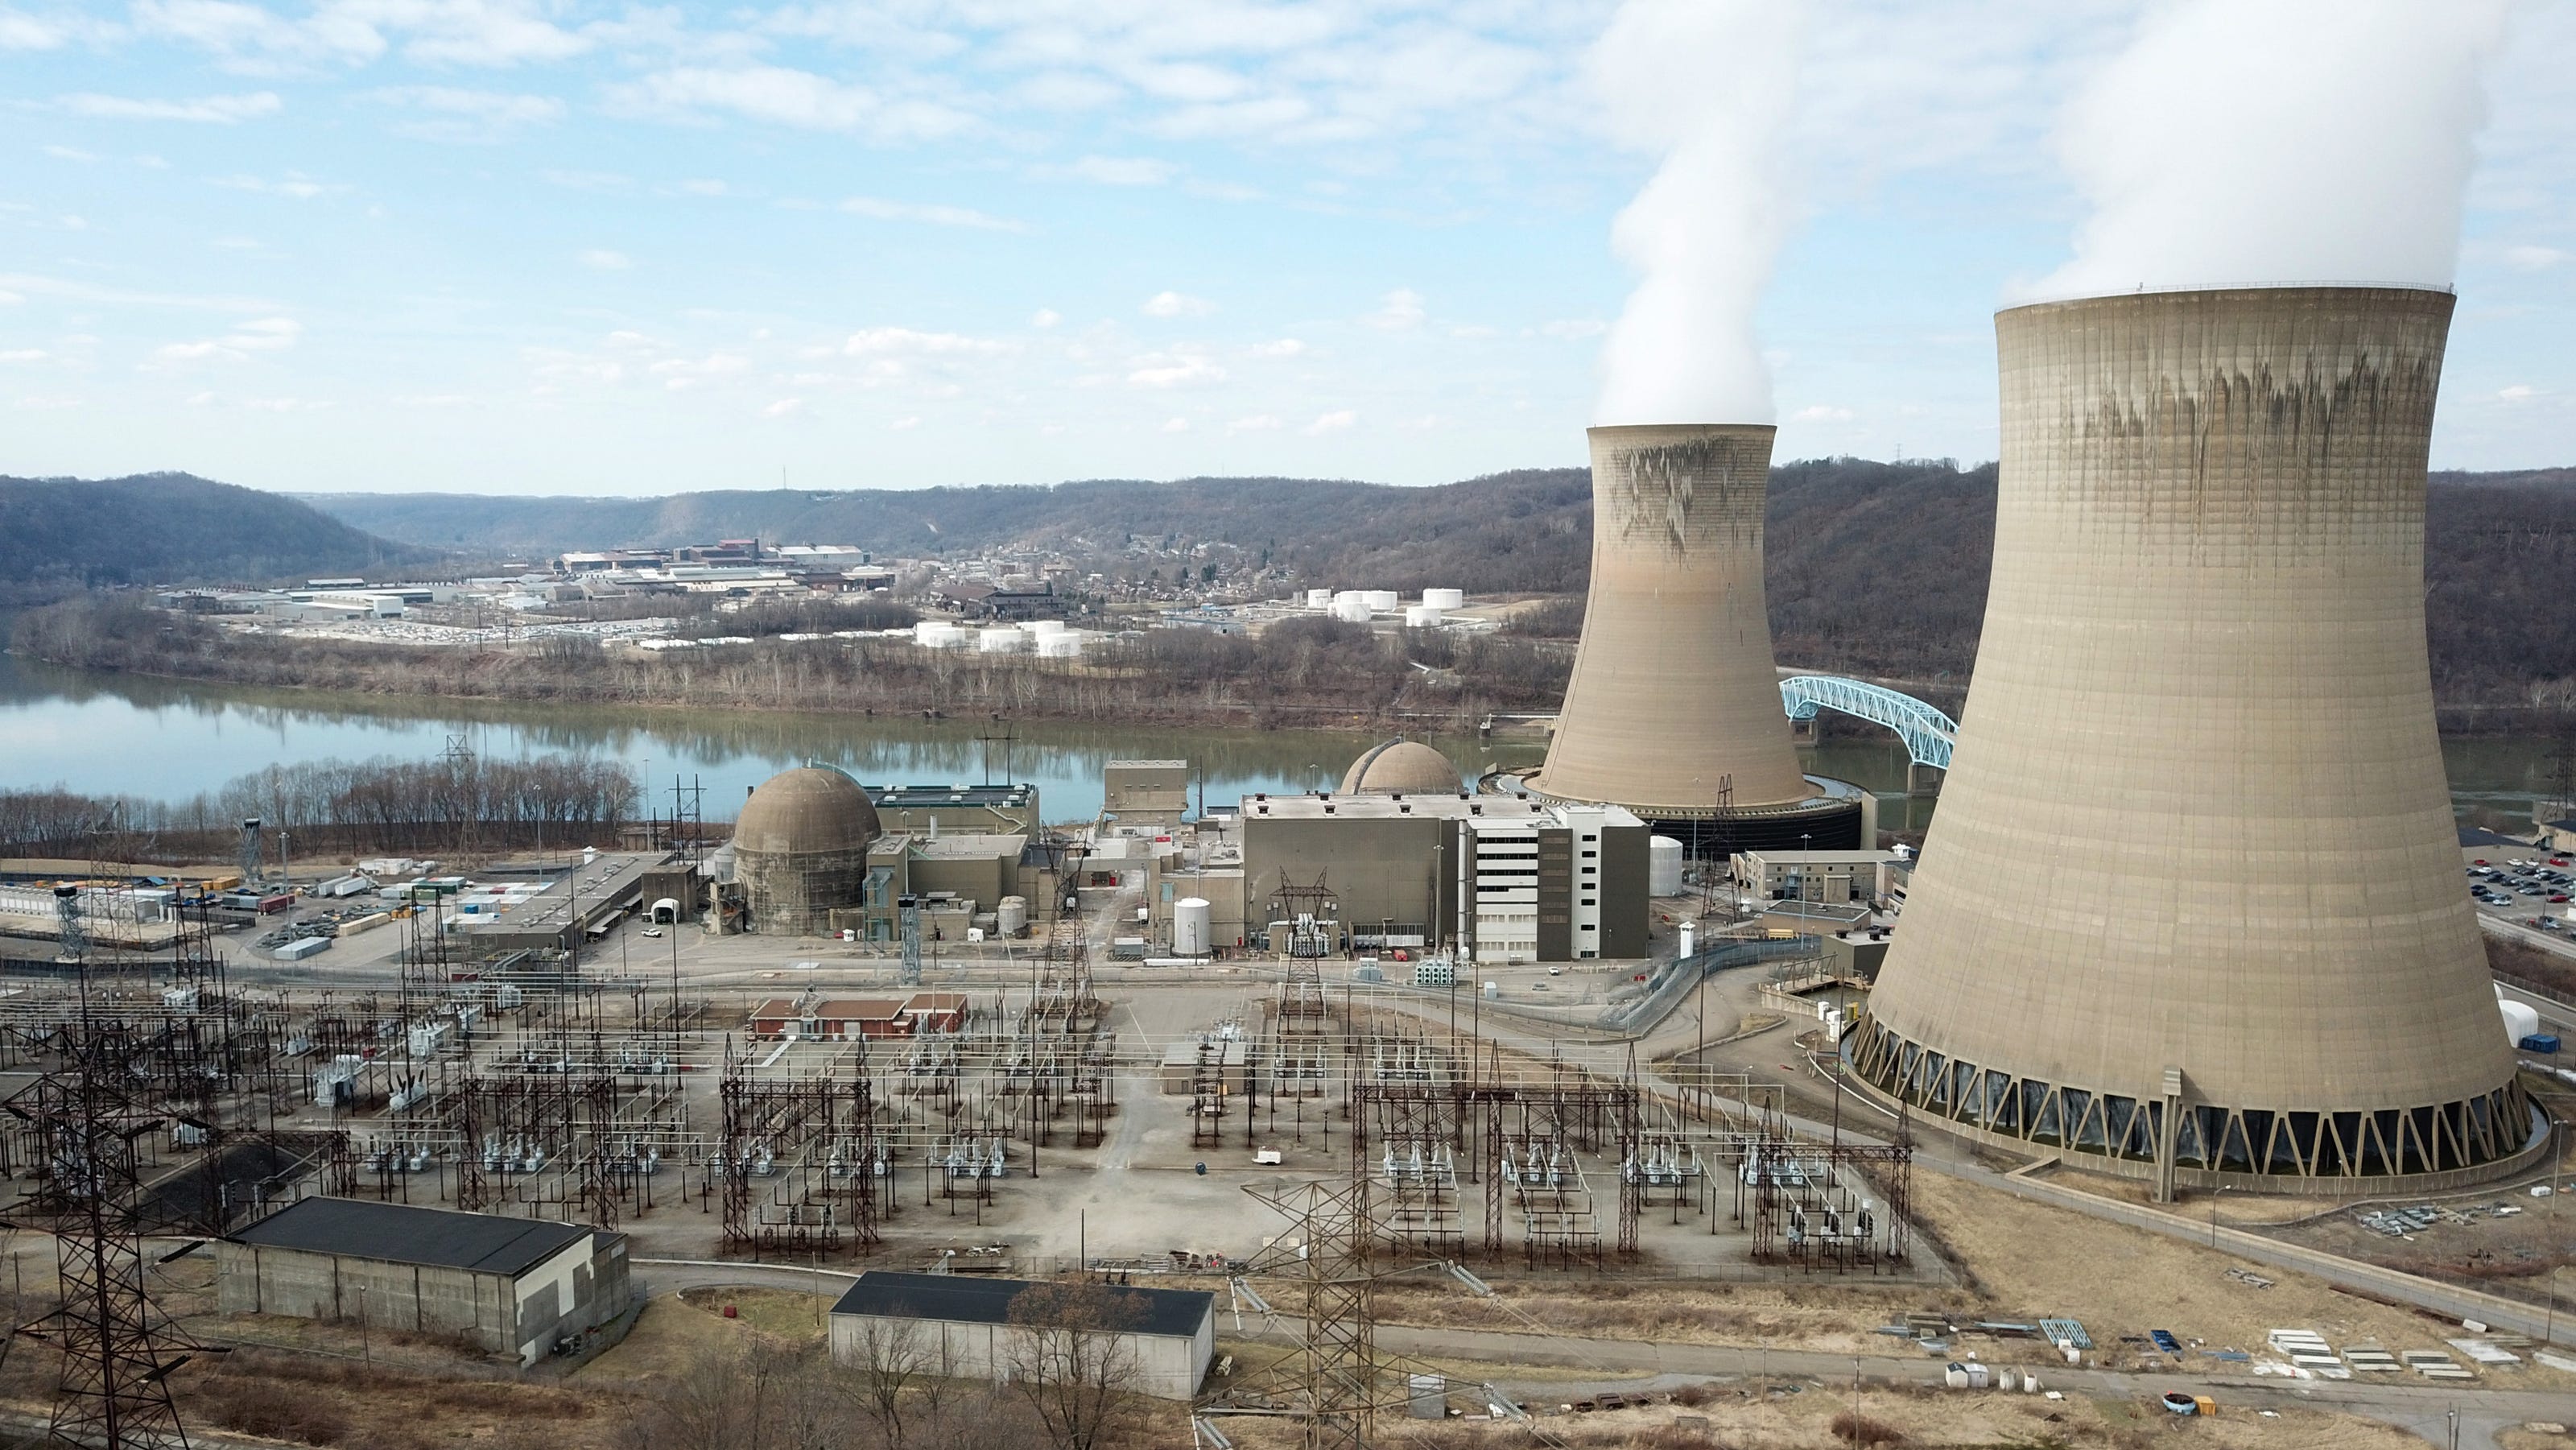 Texas company acquire Beaver Valley Power in merger deal